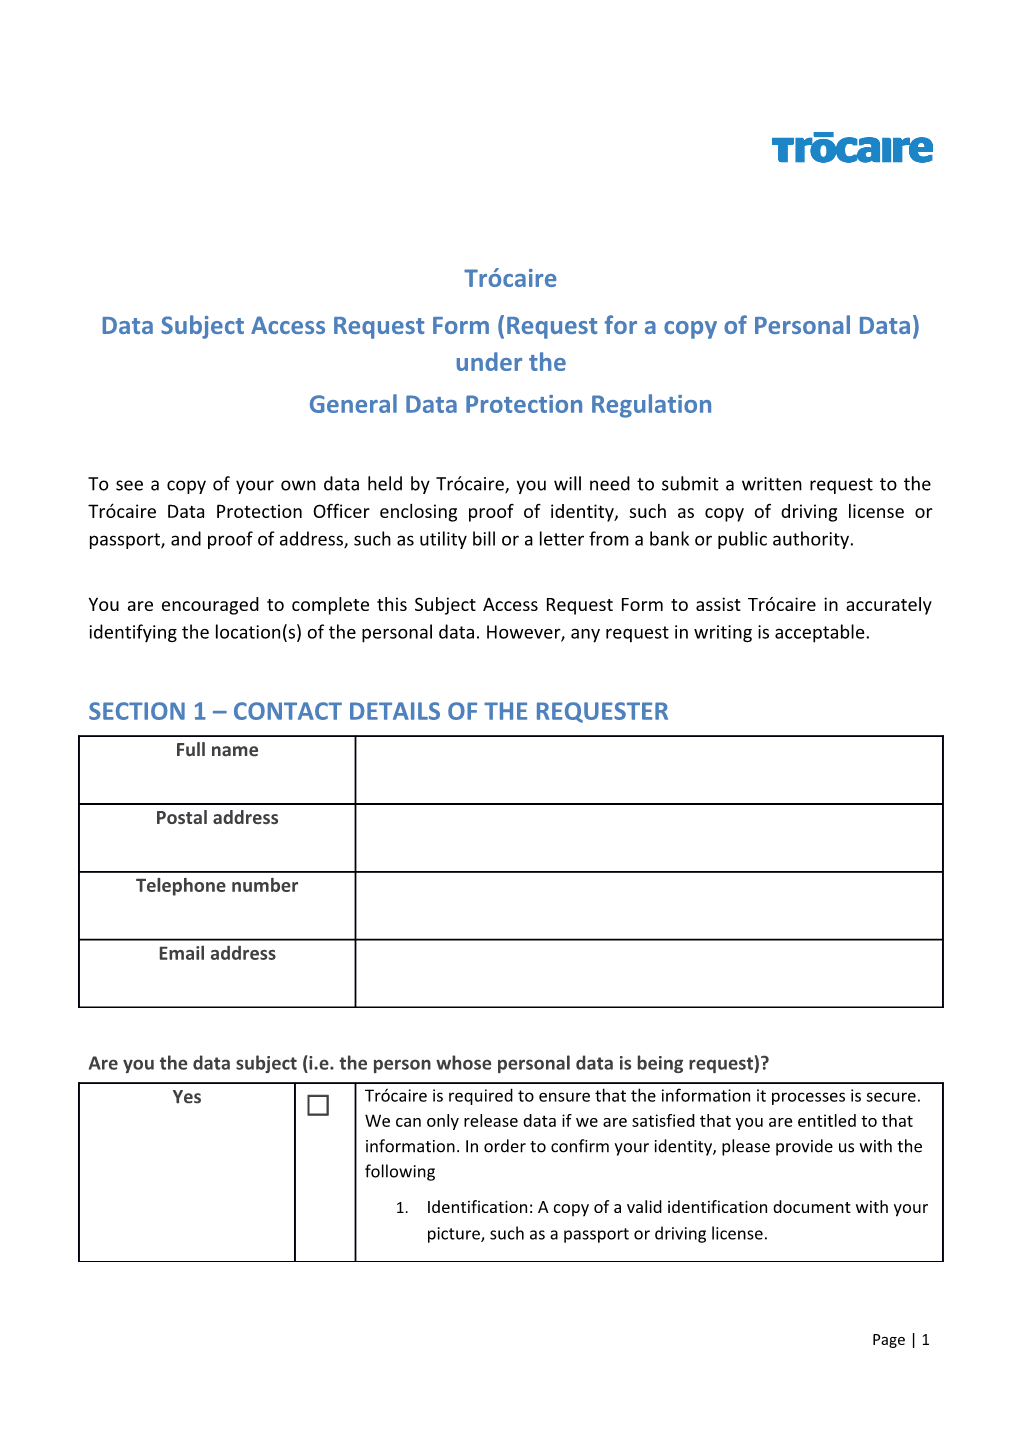 Data Subject Access Request Form (Request for a Copy of Personal Data) Under The